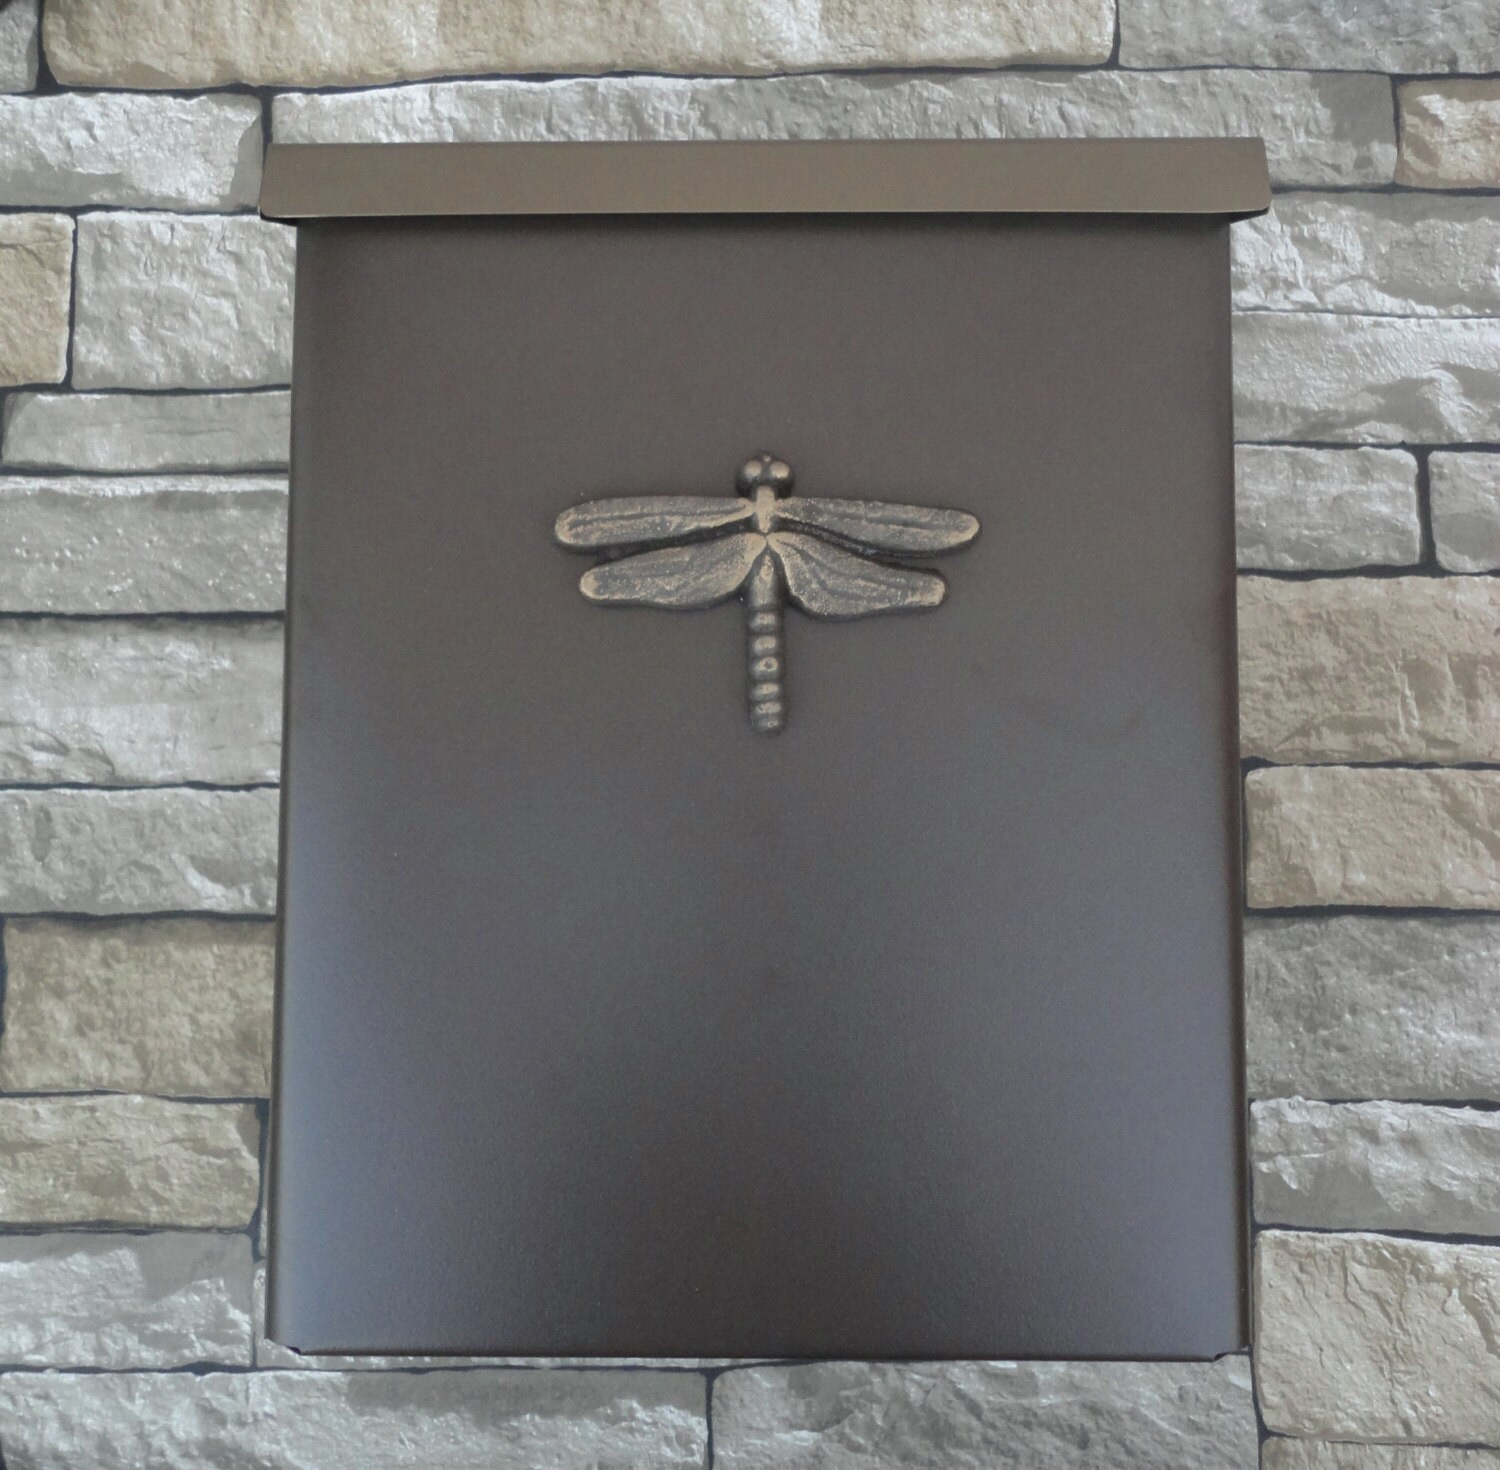 Craftsman Dragonfly Mailbox Oil Rubbed Bronze Arts & Crafts